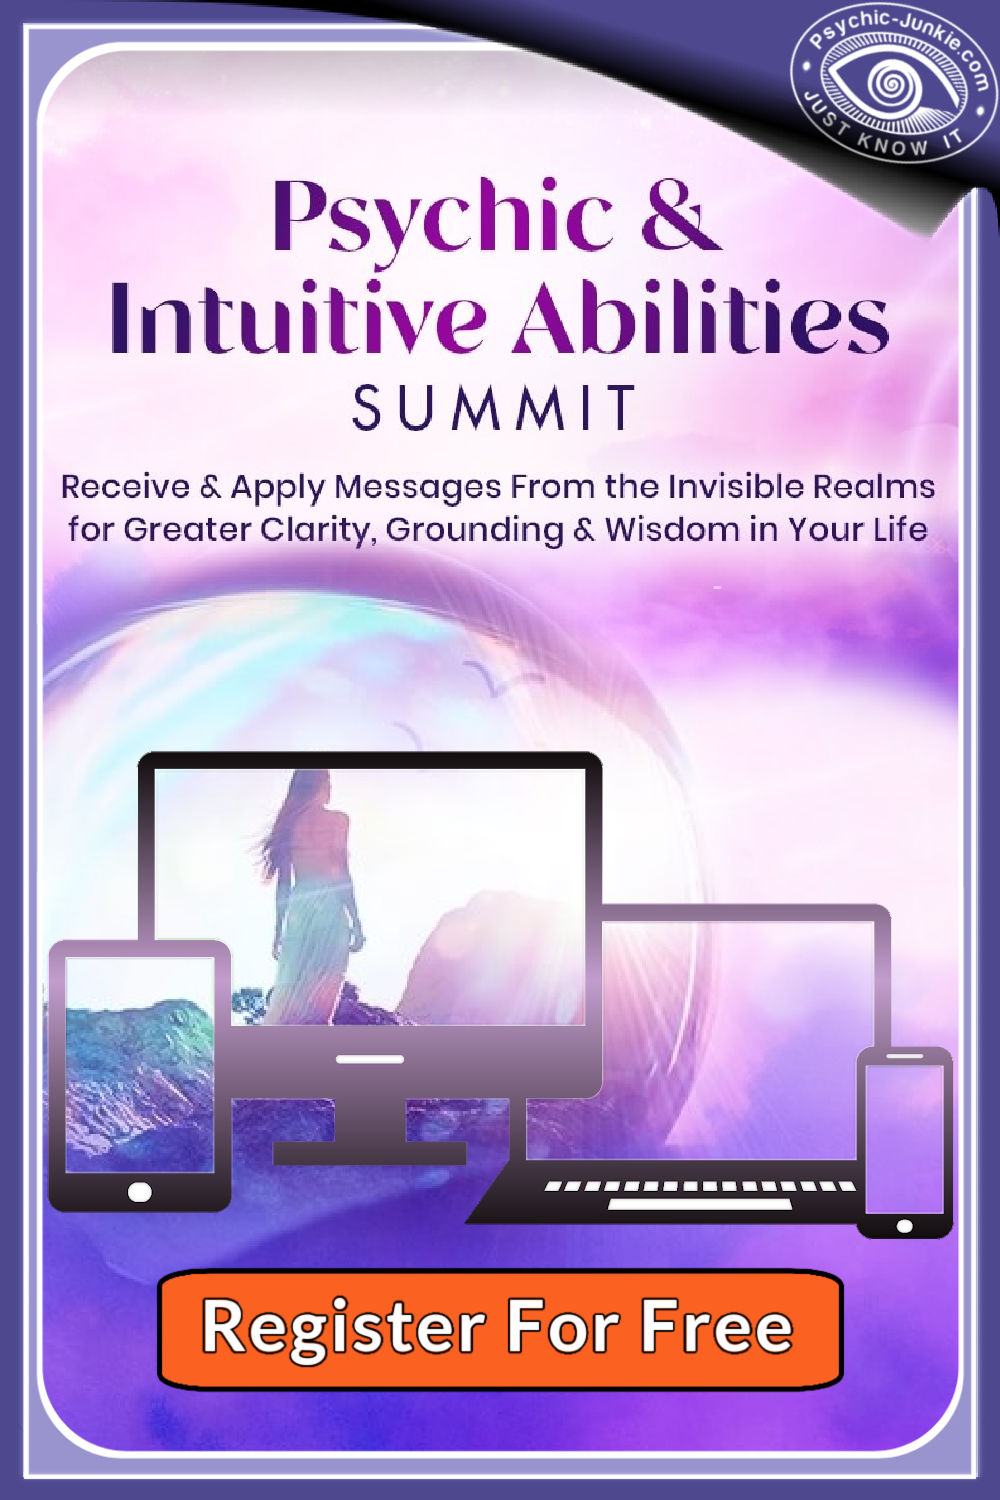 RSVP here for next Mind Body Spirit Online Summit - at no charge.